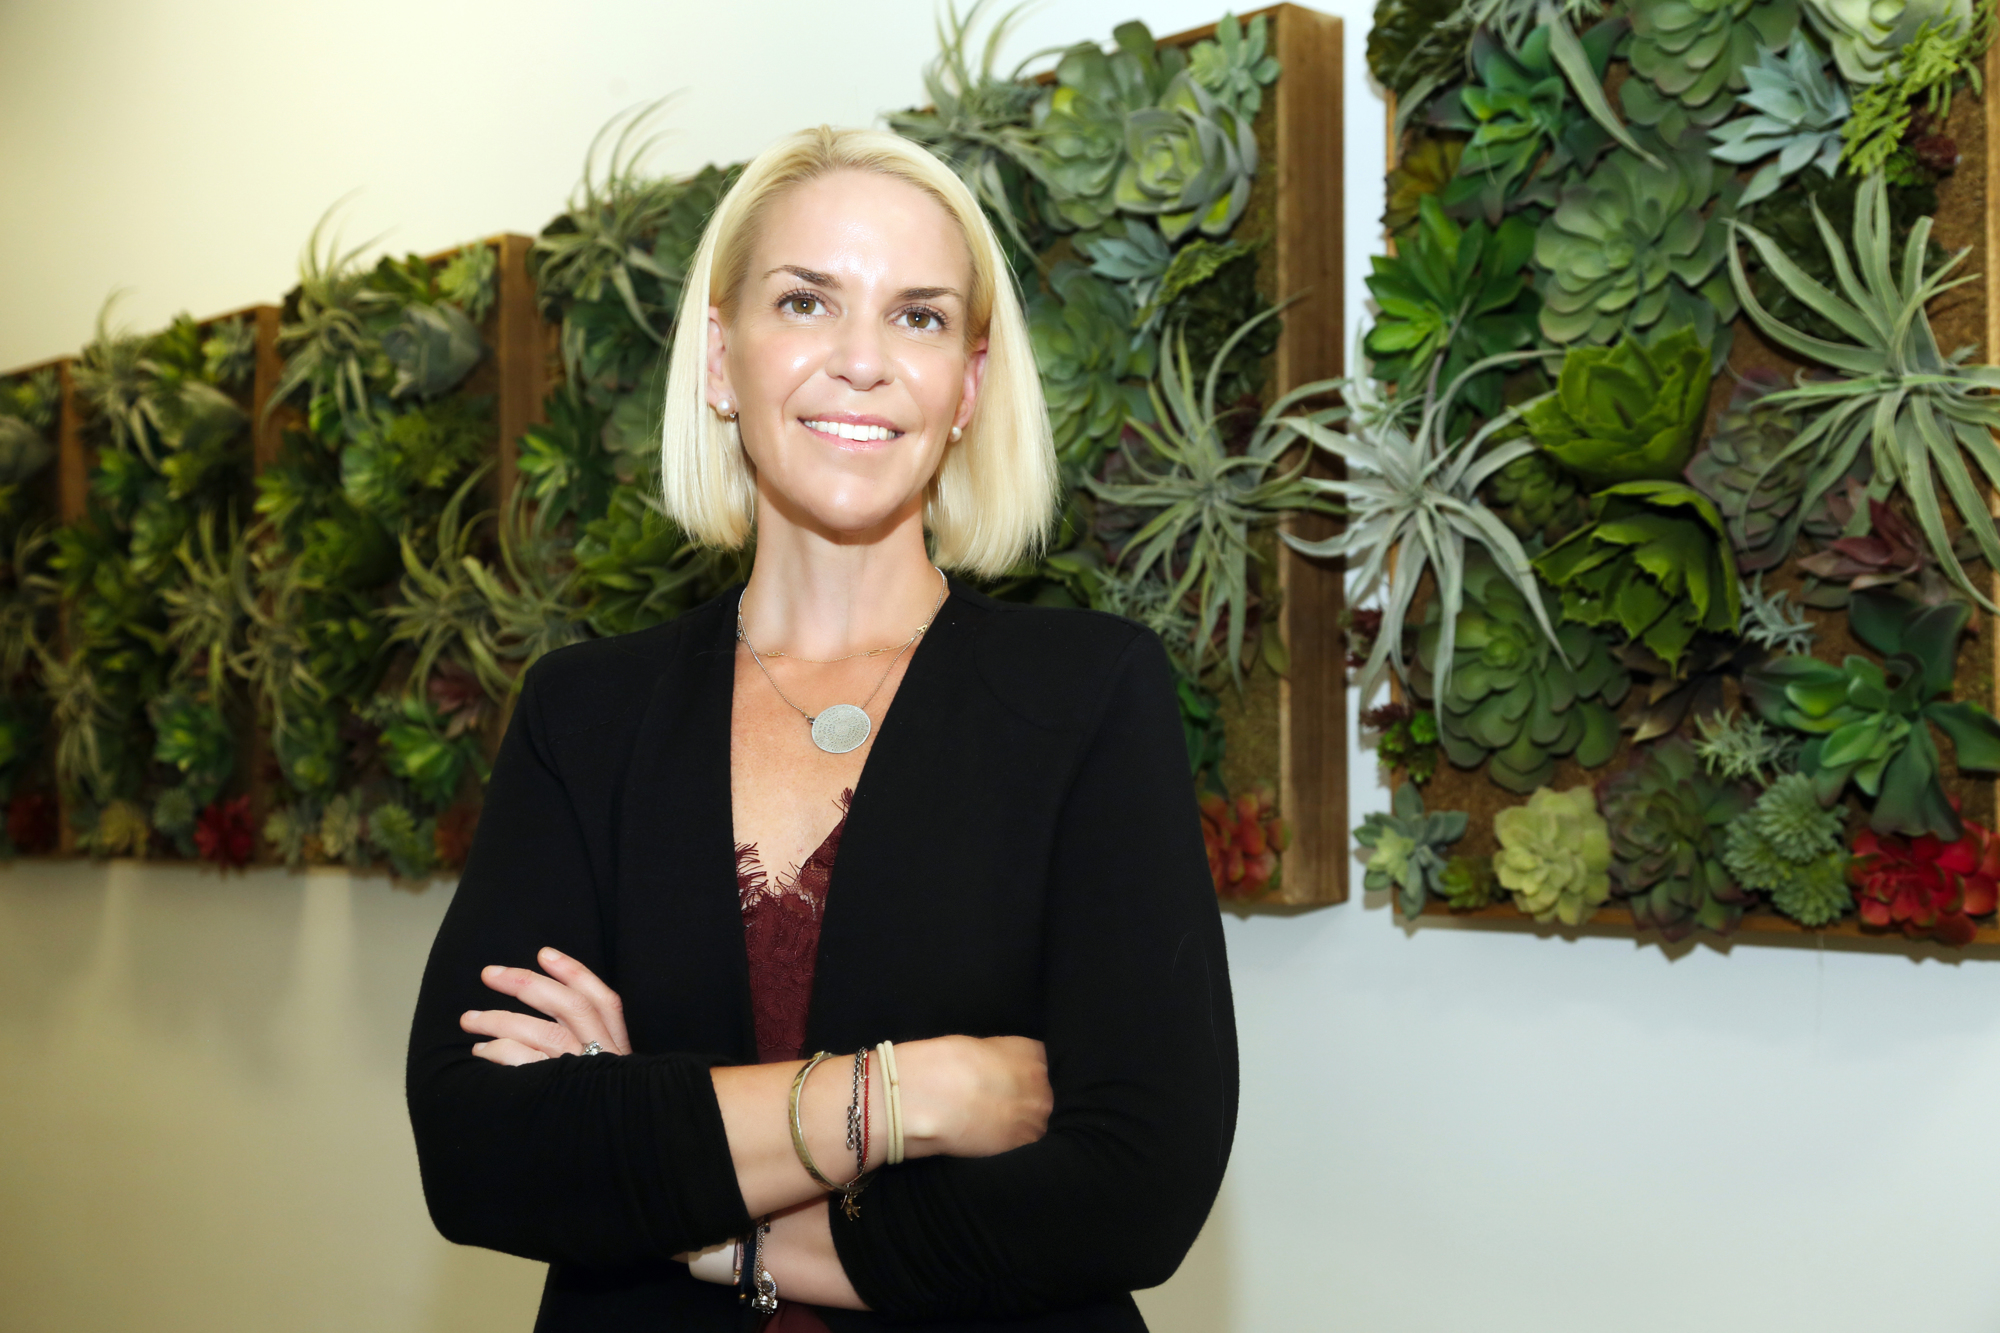 Stefania Pifferi. Elizabeth Dosoretz founded Fort Myers-based Elite DNA Therapy Services in 2015.